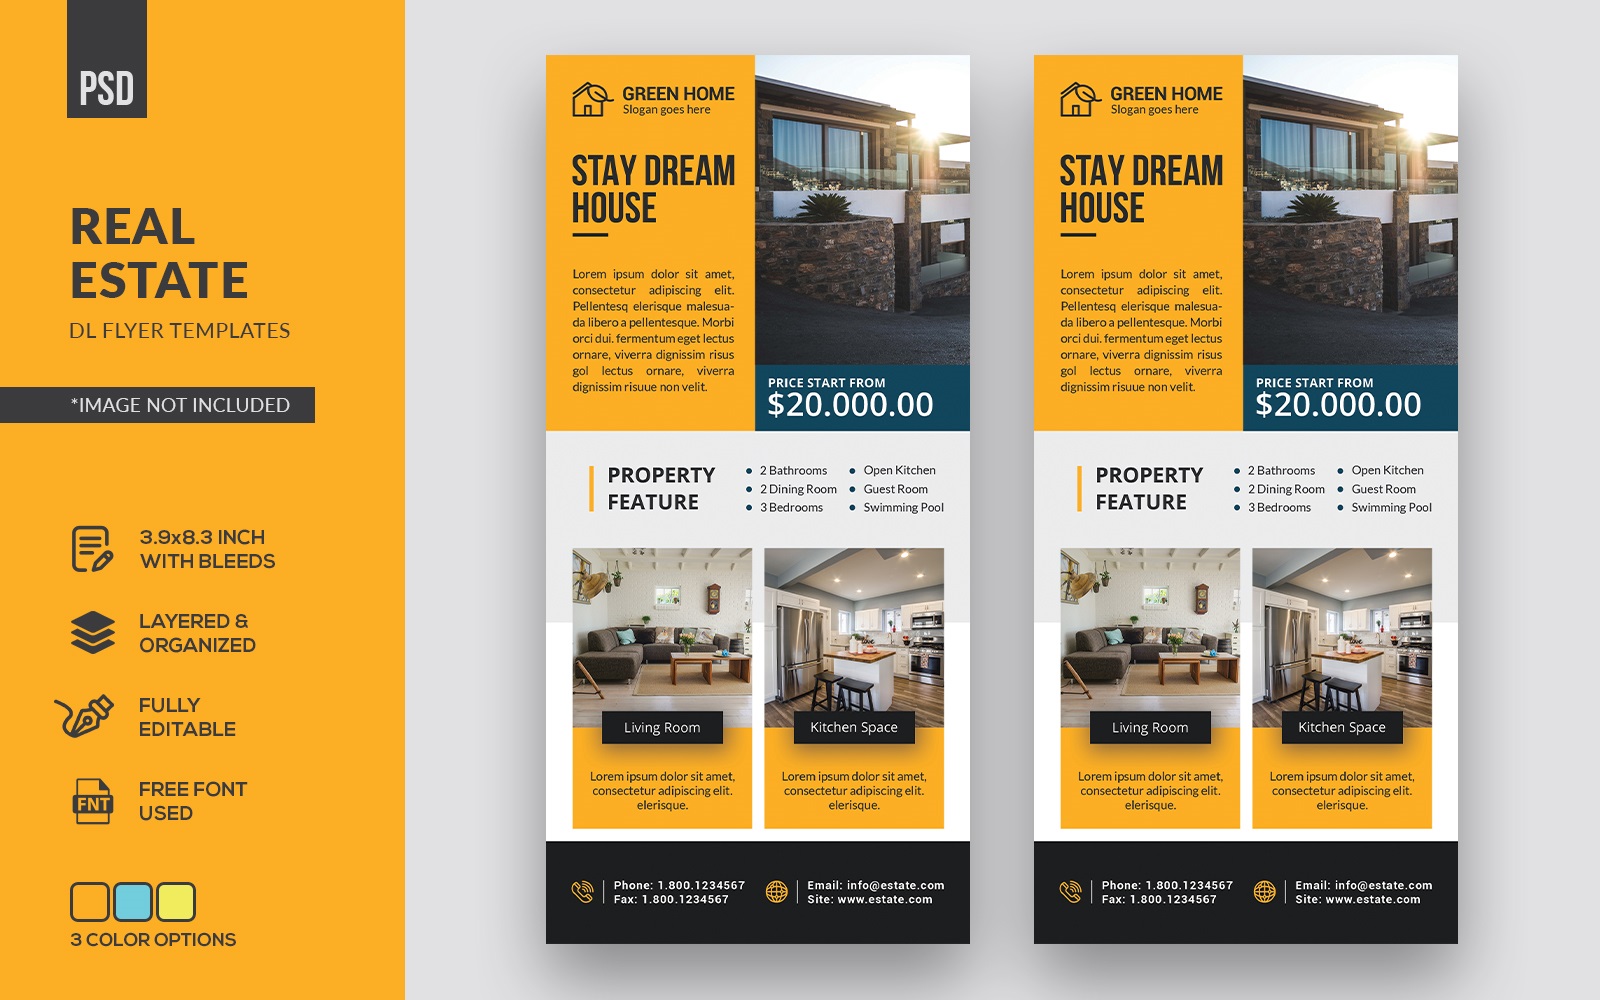 Real Estate DL Flyer - Corporate Identity Template